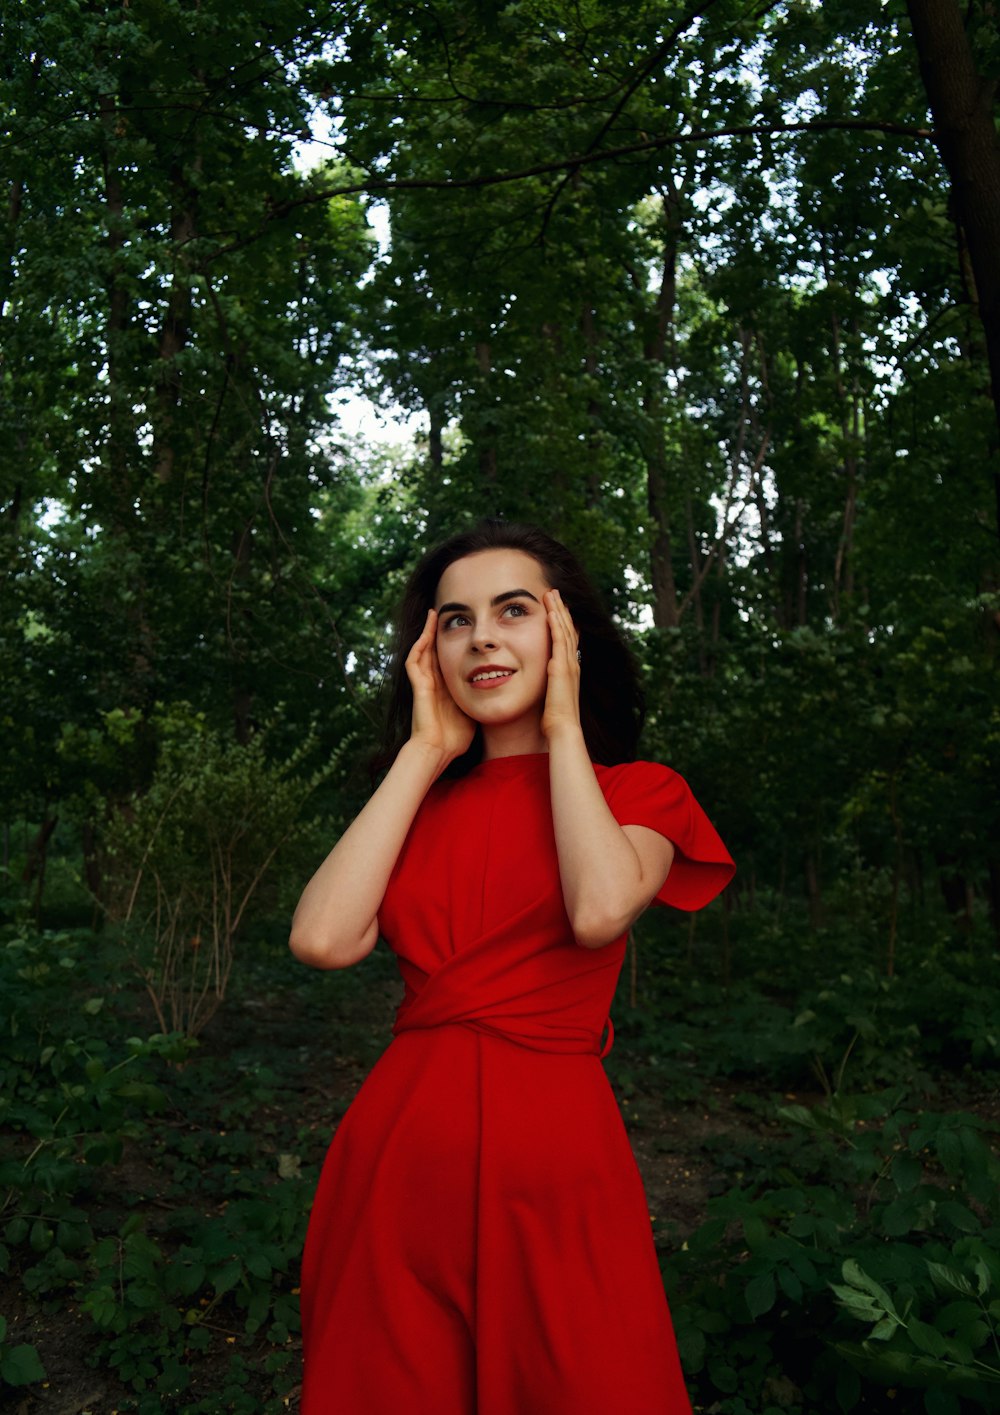 woman in red dress standing under green tree during daytime